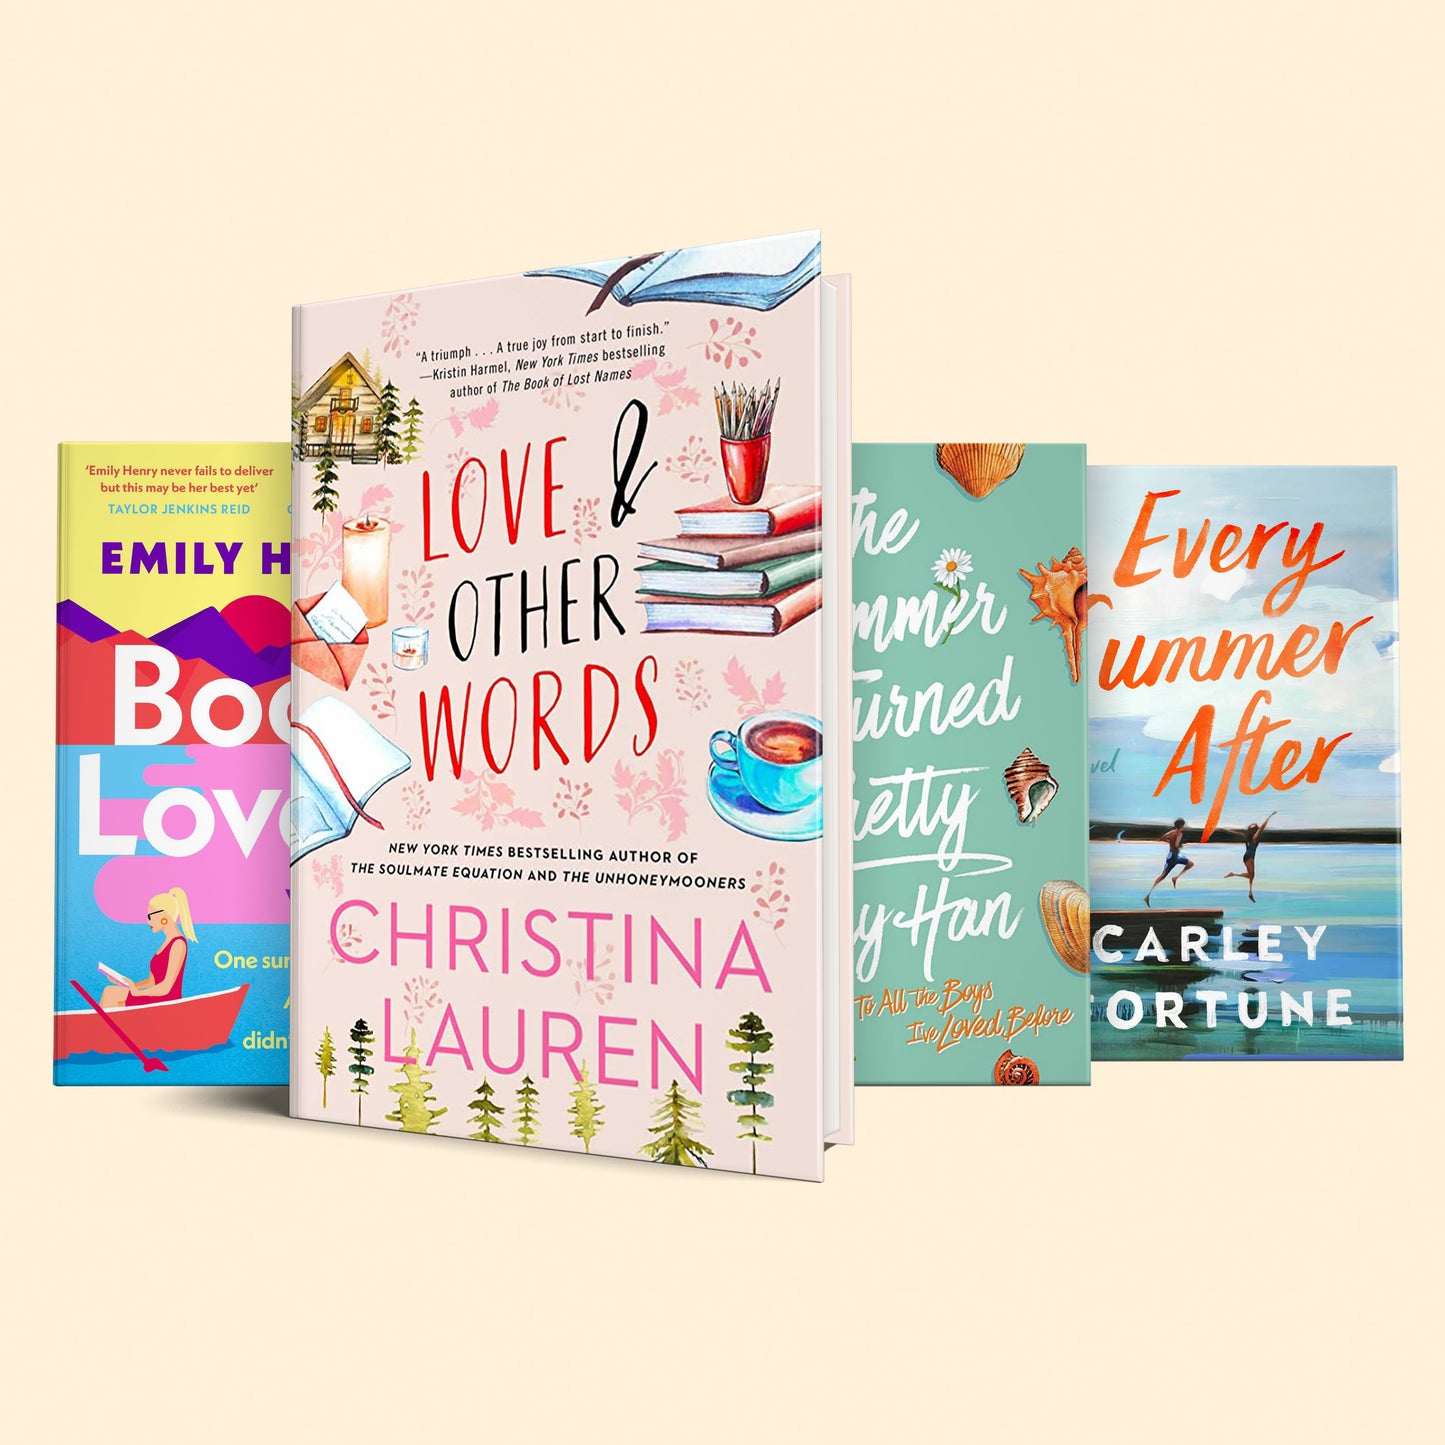 4 books to ignite your summer: love and other words, Every summer after, book lovers, summer i turned pretty